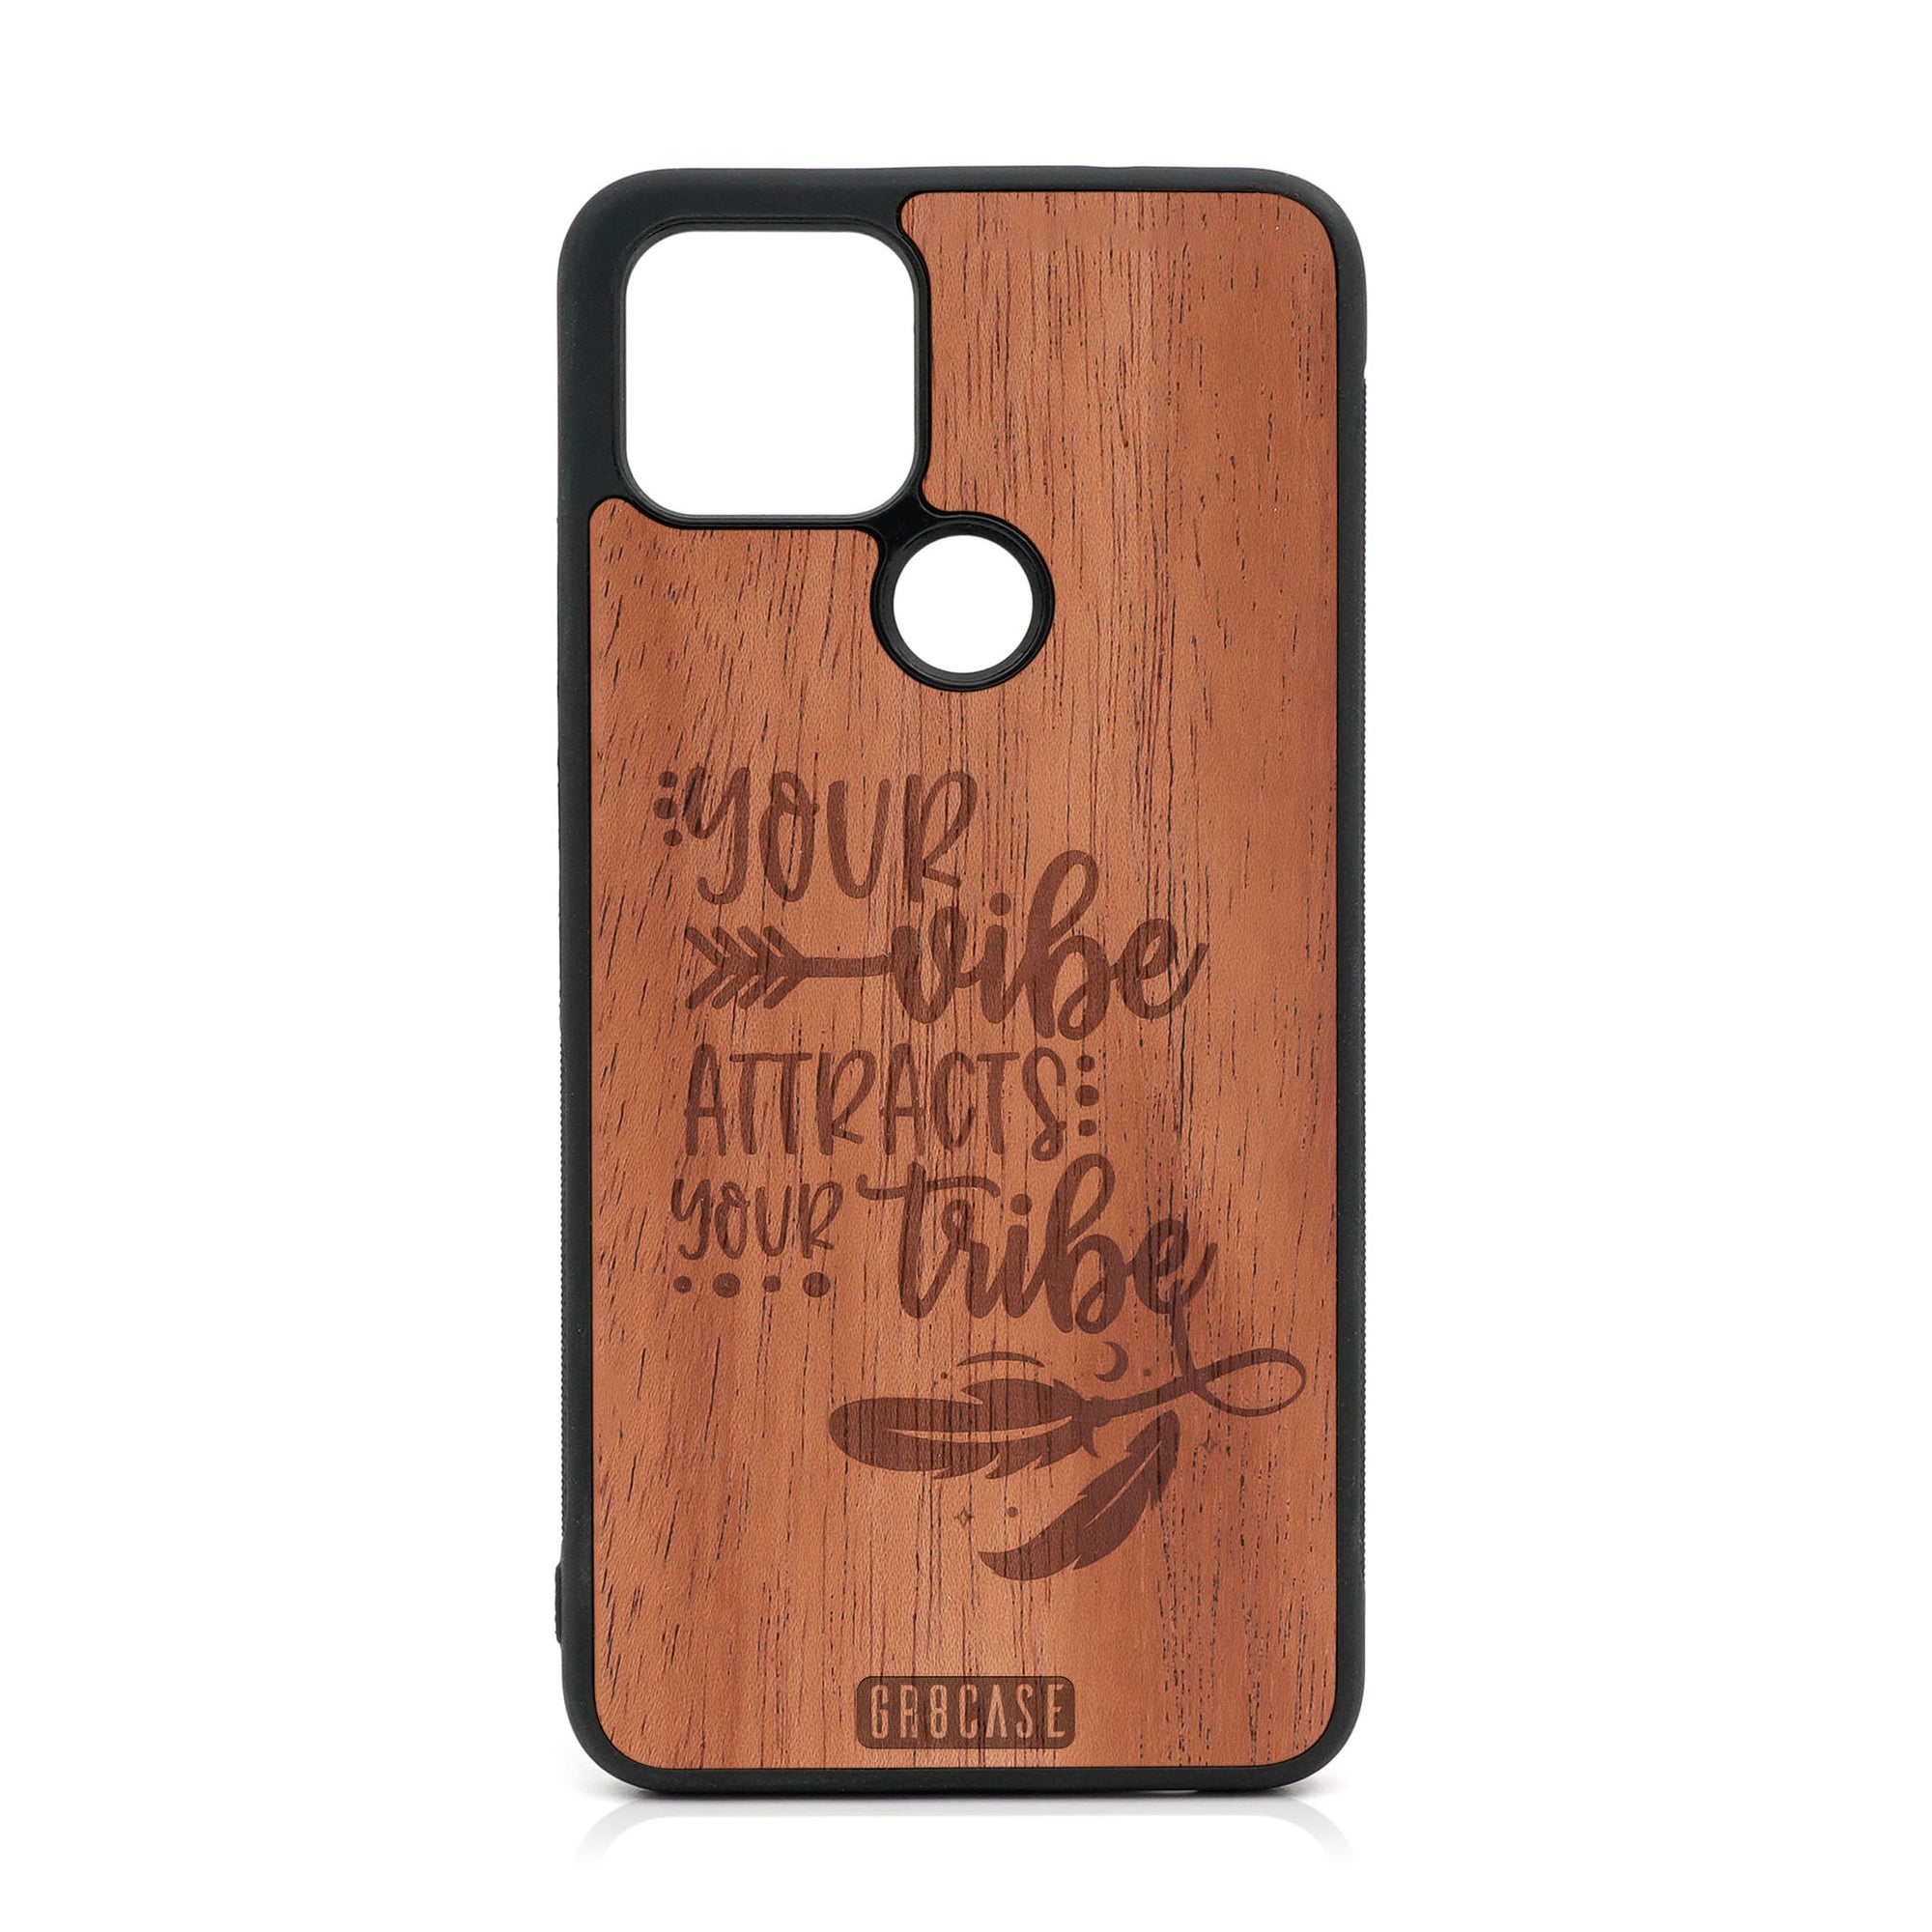 Your Vibe Attracts Your Tribe Design Wood Case For Google Pixel 5 XL/4A 5G